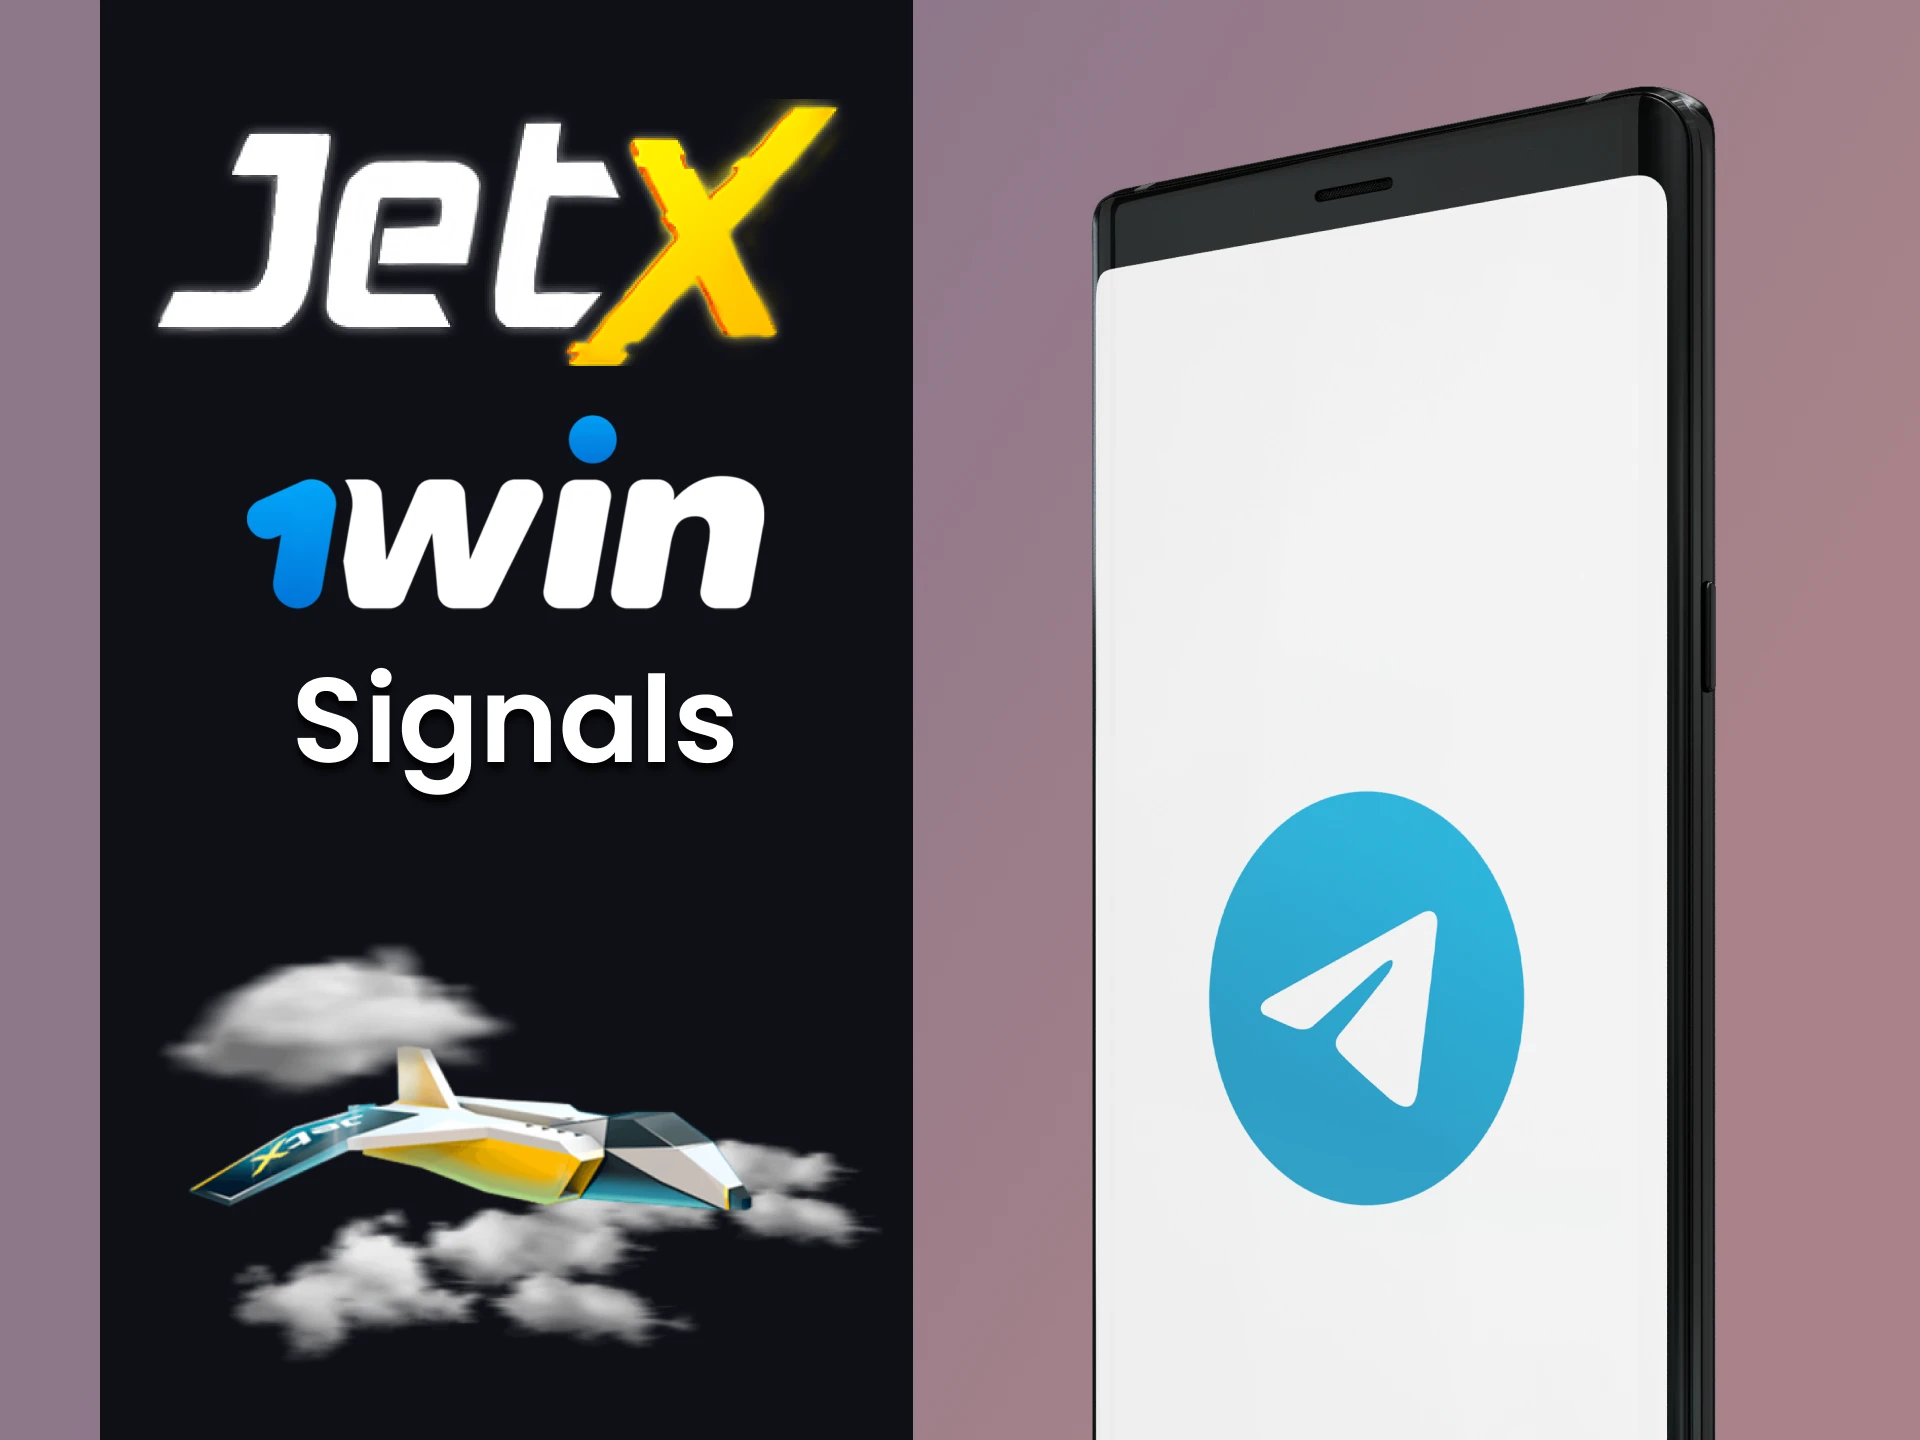 We will talk about signals for JetX from 1win.